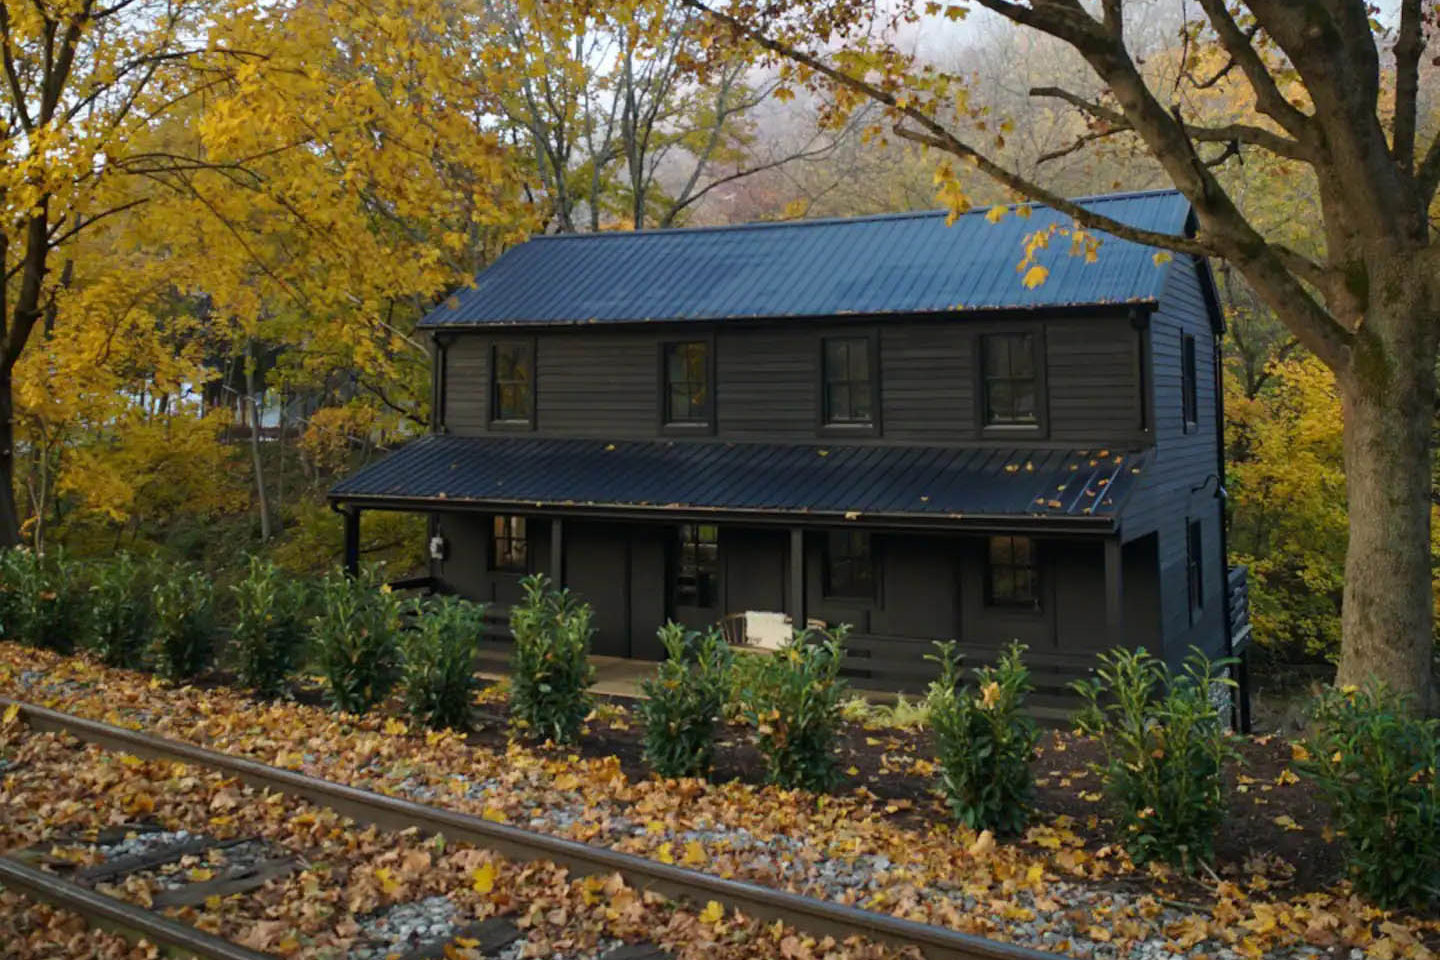 Creek house a restored historic cottage by train track